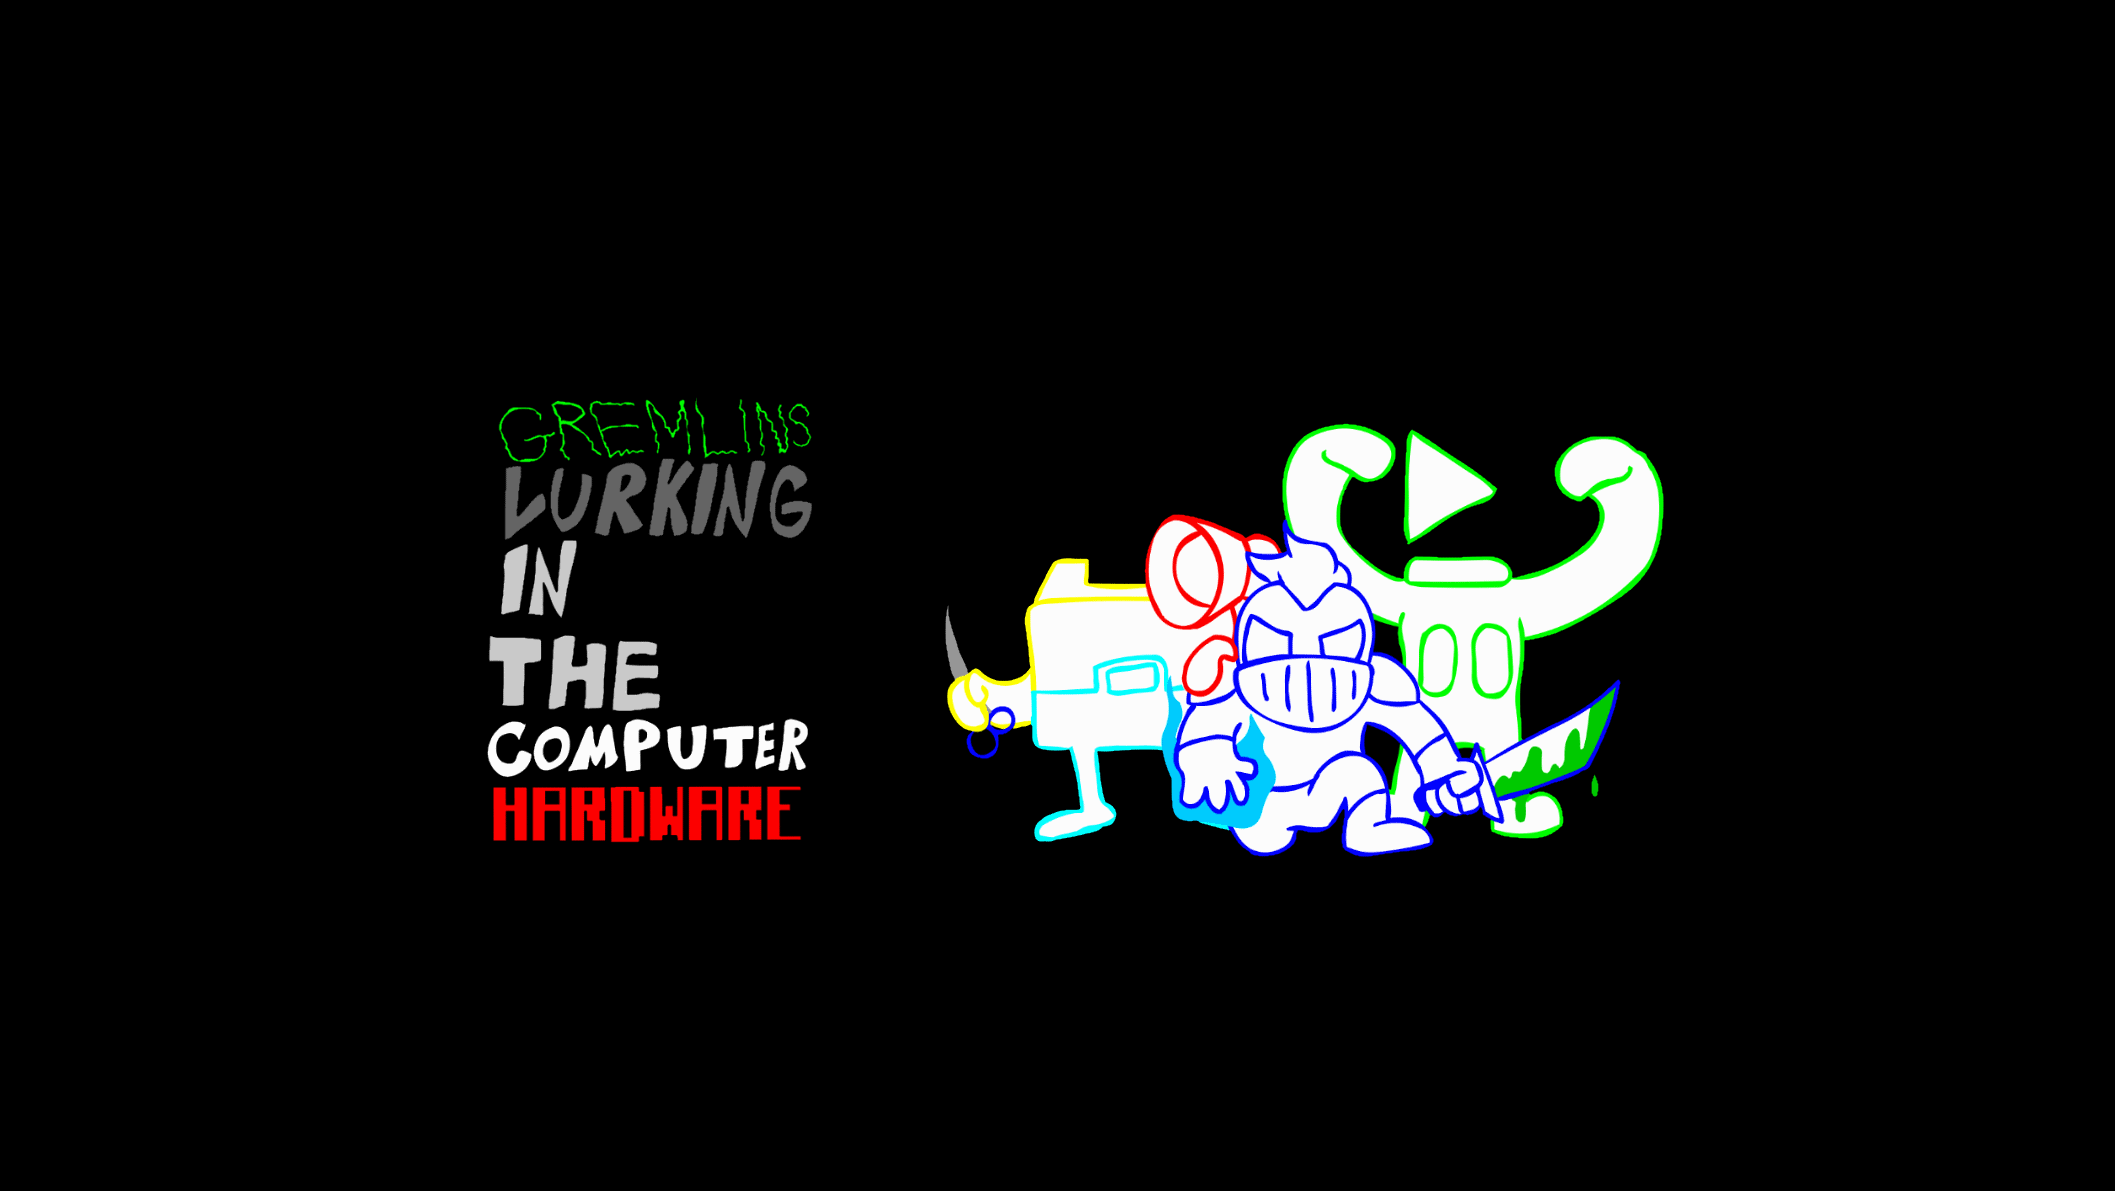 G.L.I.T.C.H: What does GLITCH mean in Computing? Gremlins